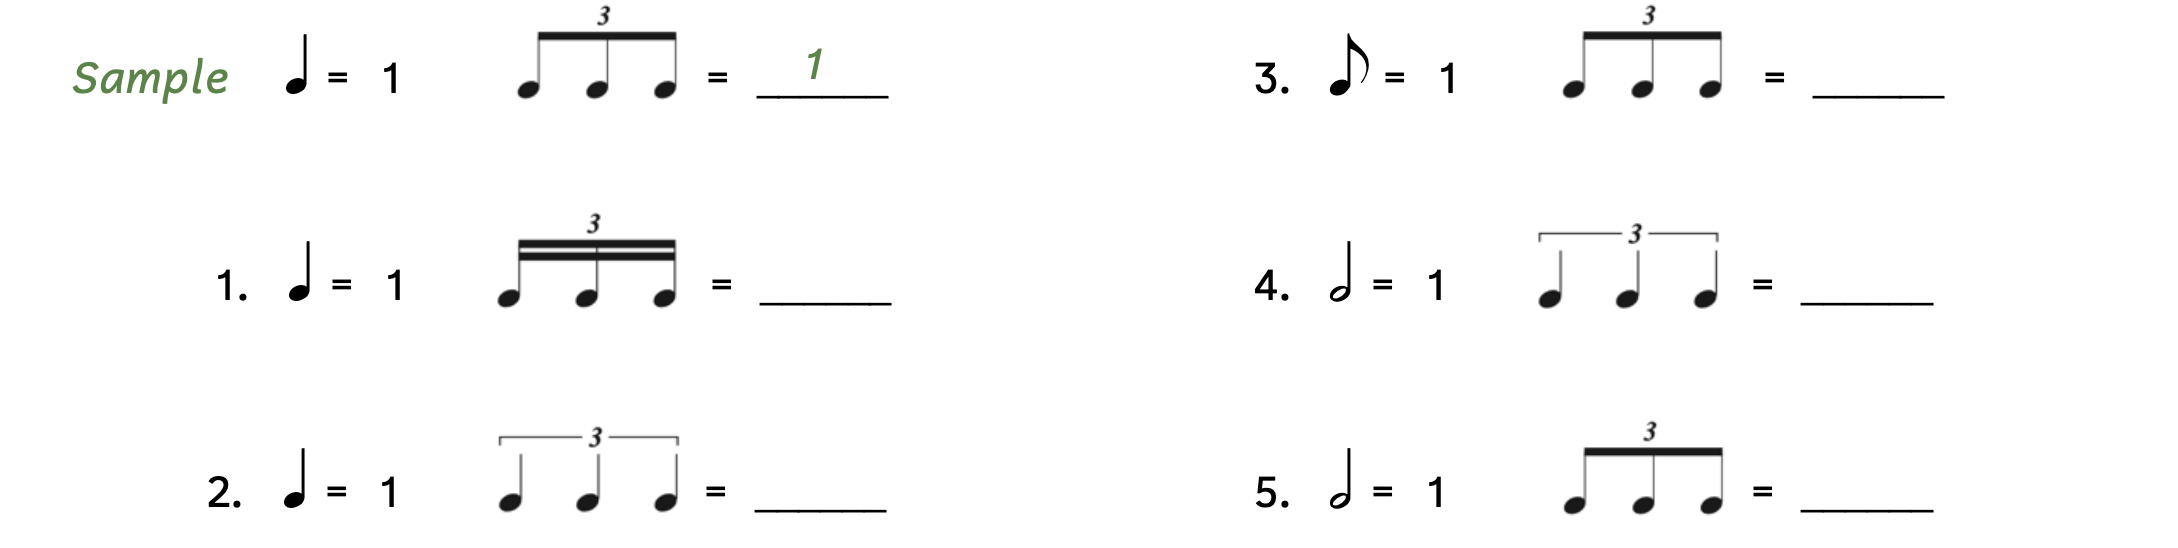 Exercise asking to write how many beats or how much of one beat the following triplets are worth. Number 1 gives a quarter note beat. What do three sixteenth note triplets equal? Number 2 gives a quarter note beat. What do three quarter note triplets equal? Number 3 gives an eighth note beat. What does three eighth note triplets equal? Number 4 gives a half note beat. What does three quarter note triplets equal? Number 5 gives a half note beat. What does three eighth note triplets equal?